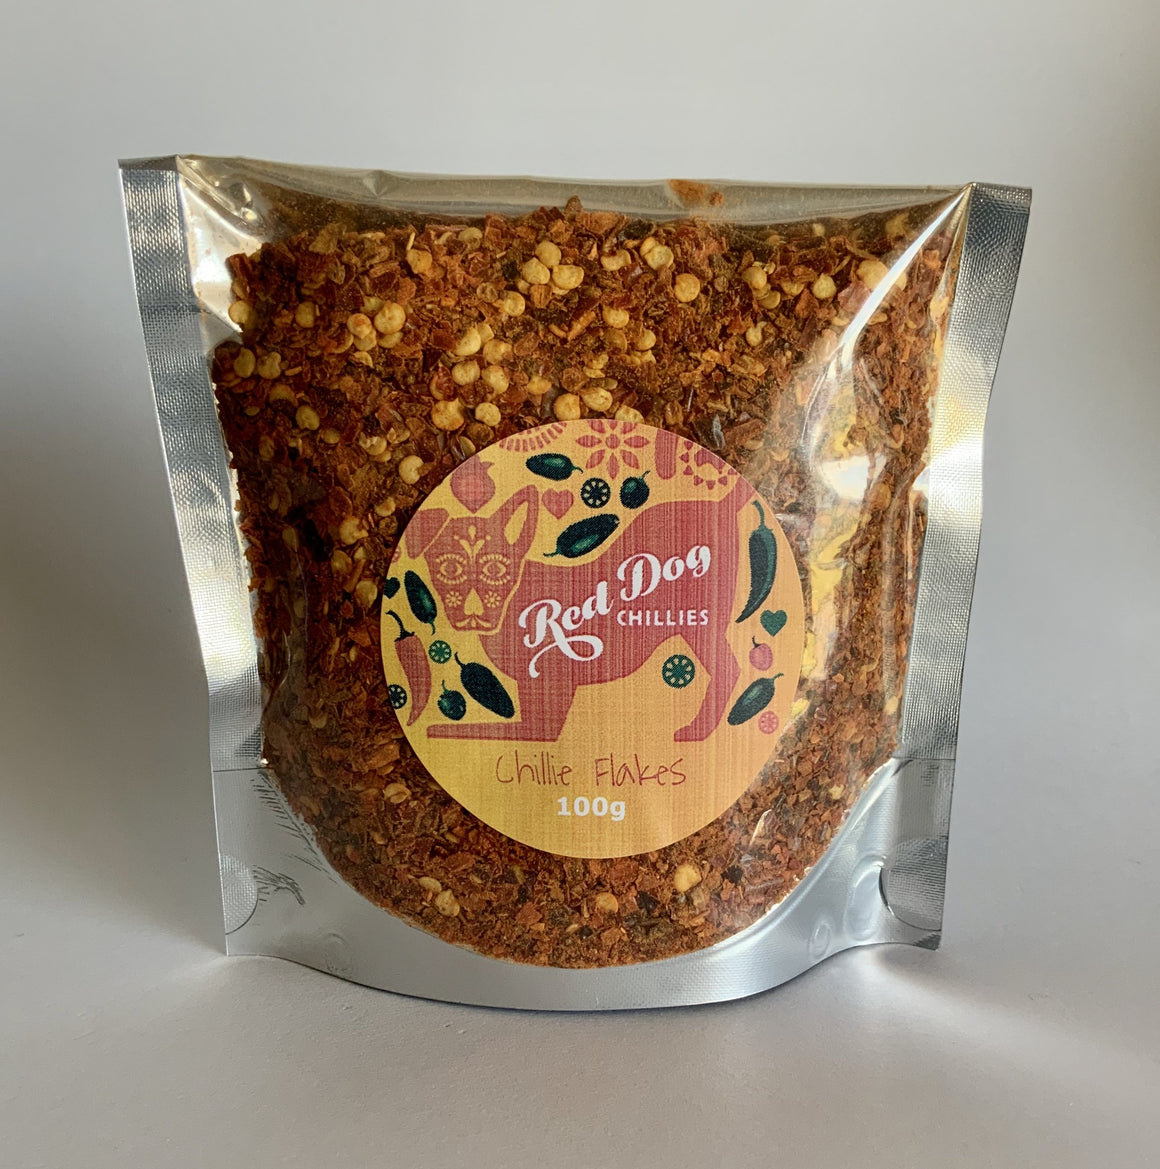 Red Dog Chillies Dried Cayenne Chilli Flakes - 100g